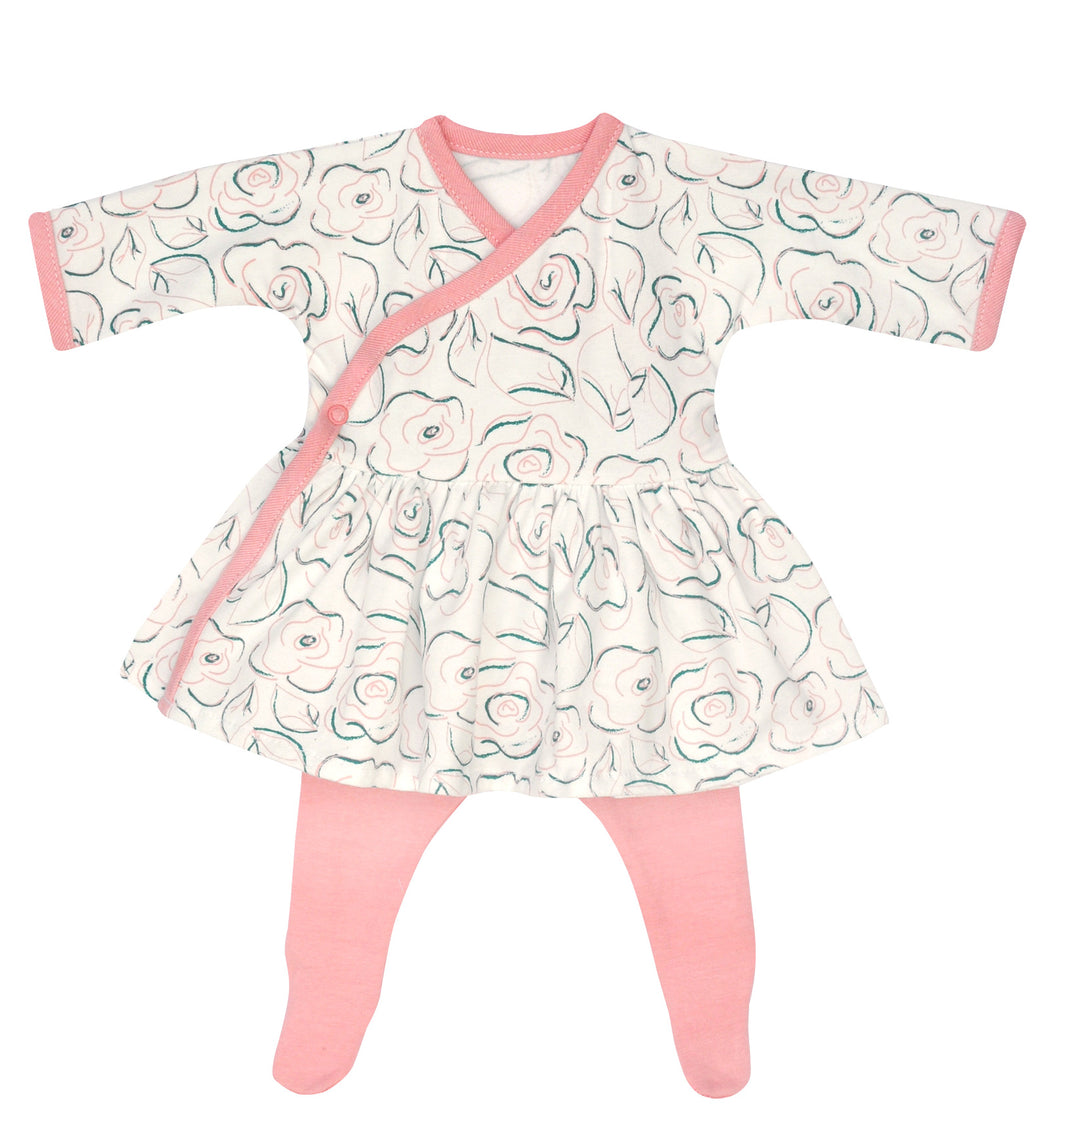 Preemie Girls, Pink and White Floral Side Snap Dress, With Pink Tights